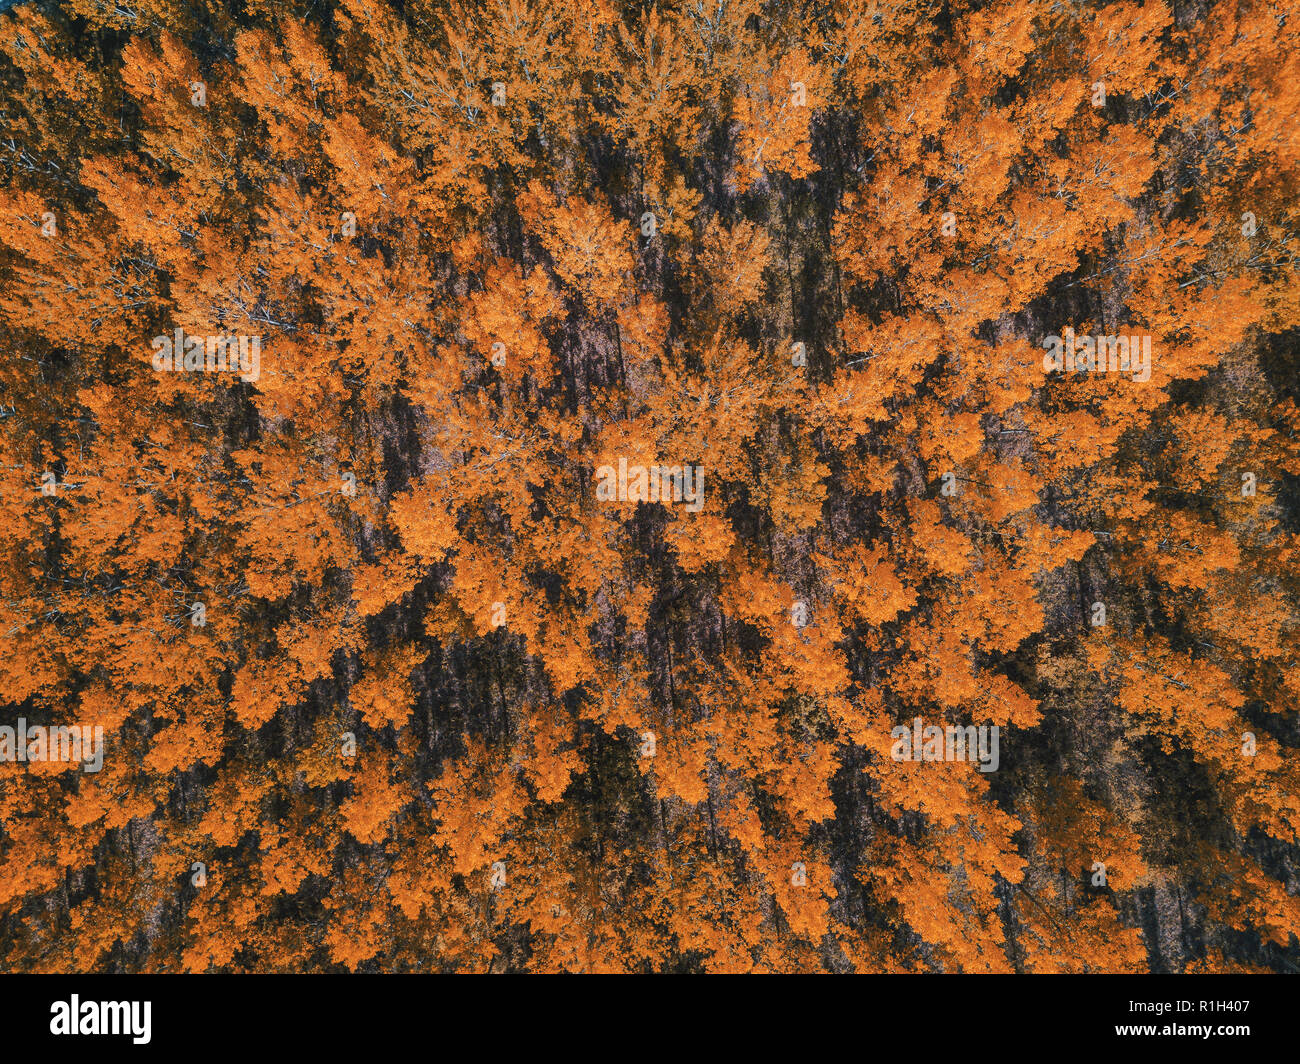 Autumn season forest scenery from drone point of view, beautiful golden brown treetops Stock Photo